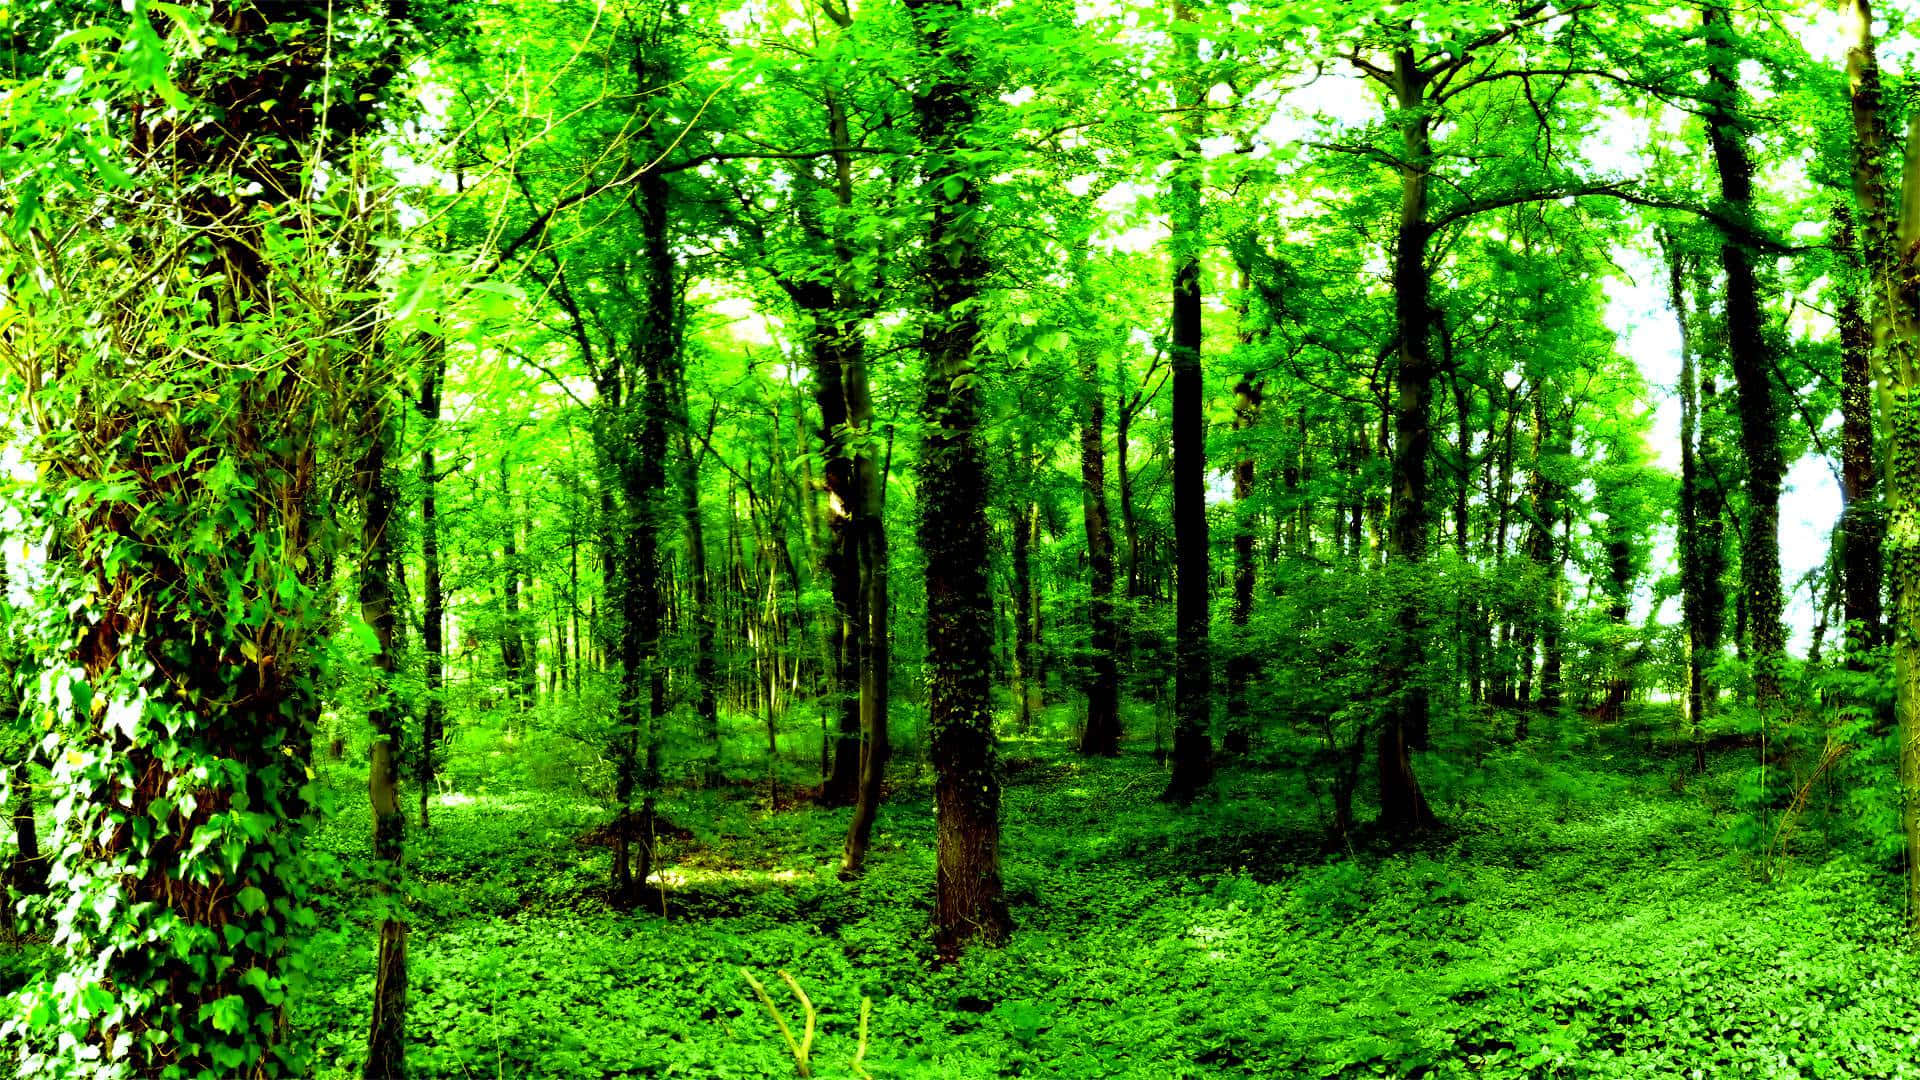 - Find yourself in nature's tranquility amongst the dark green forest Wallpaper